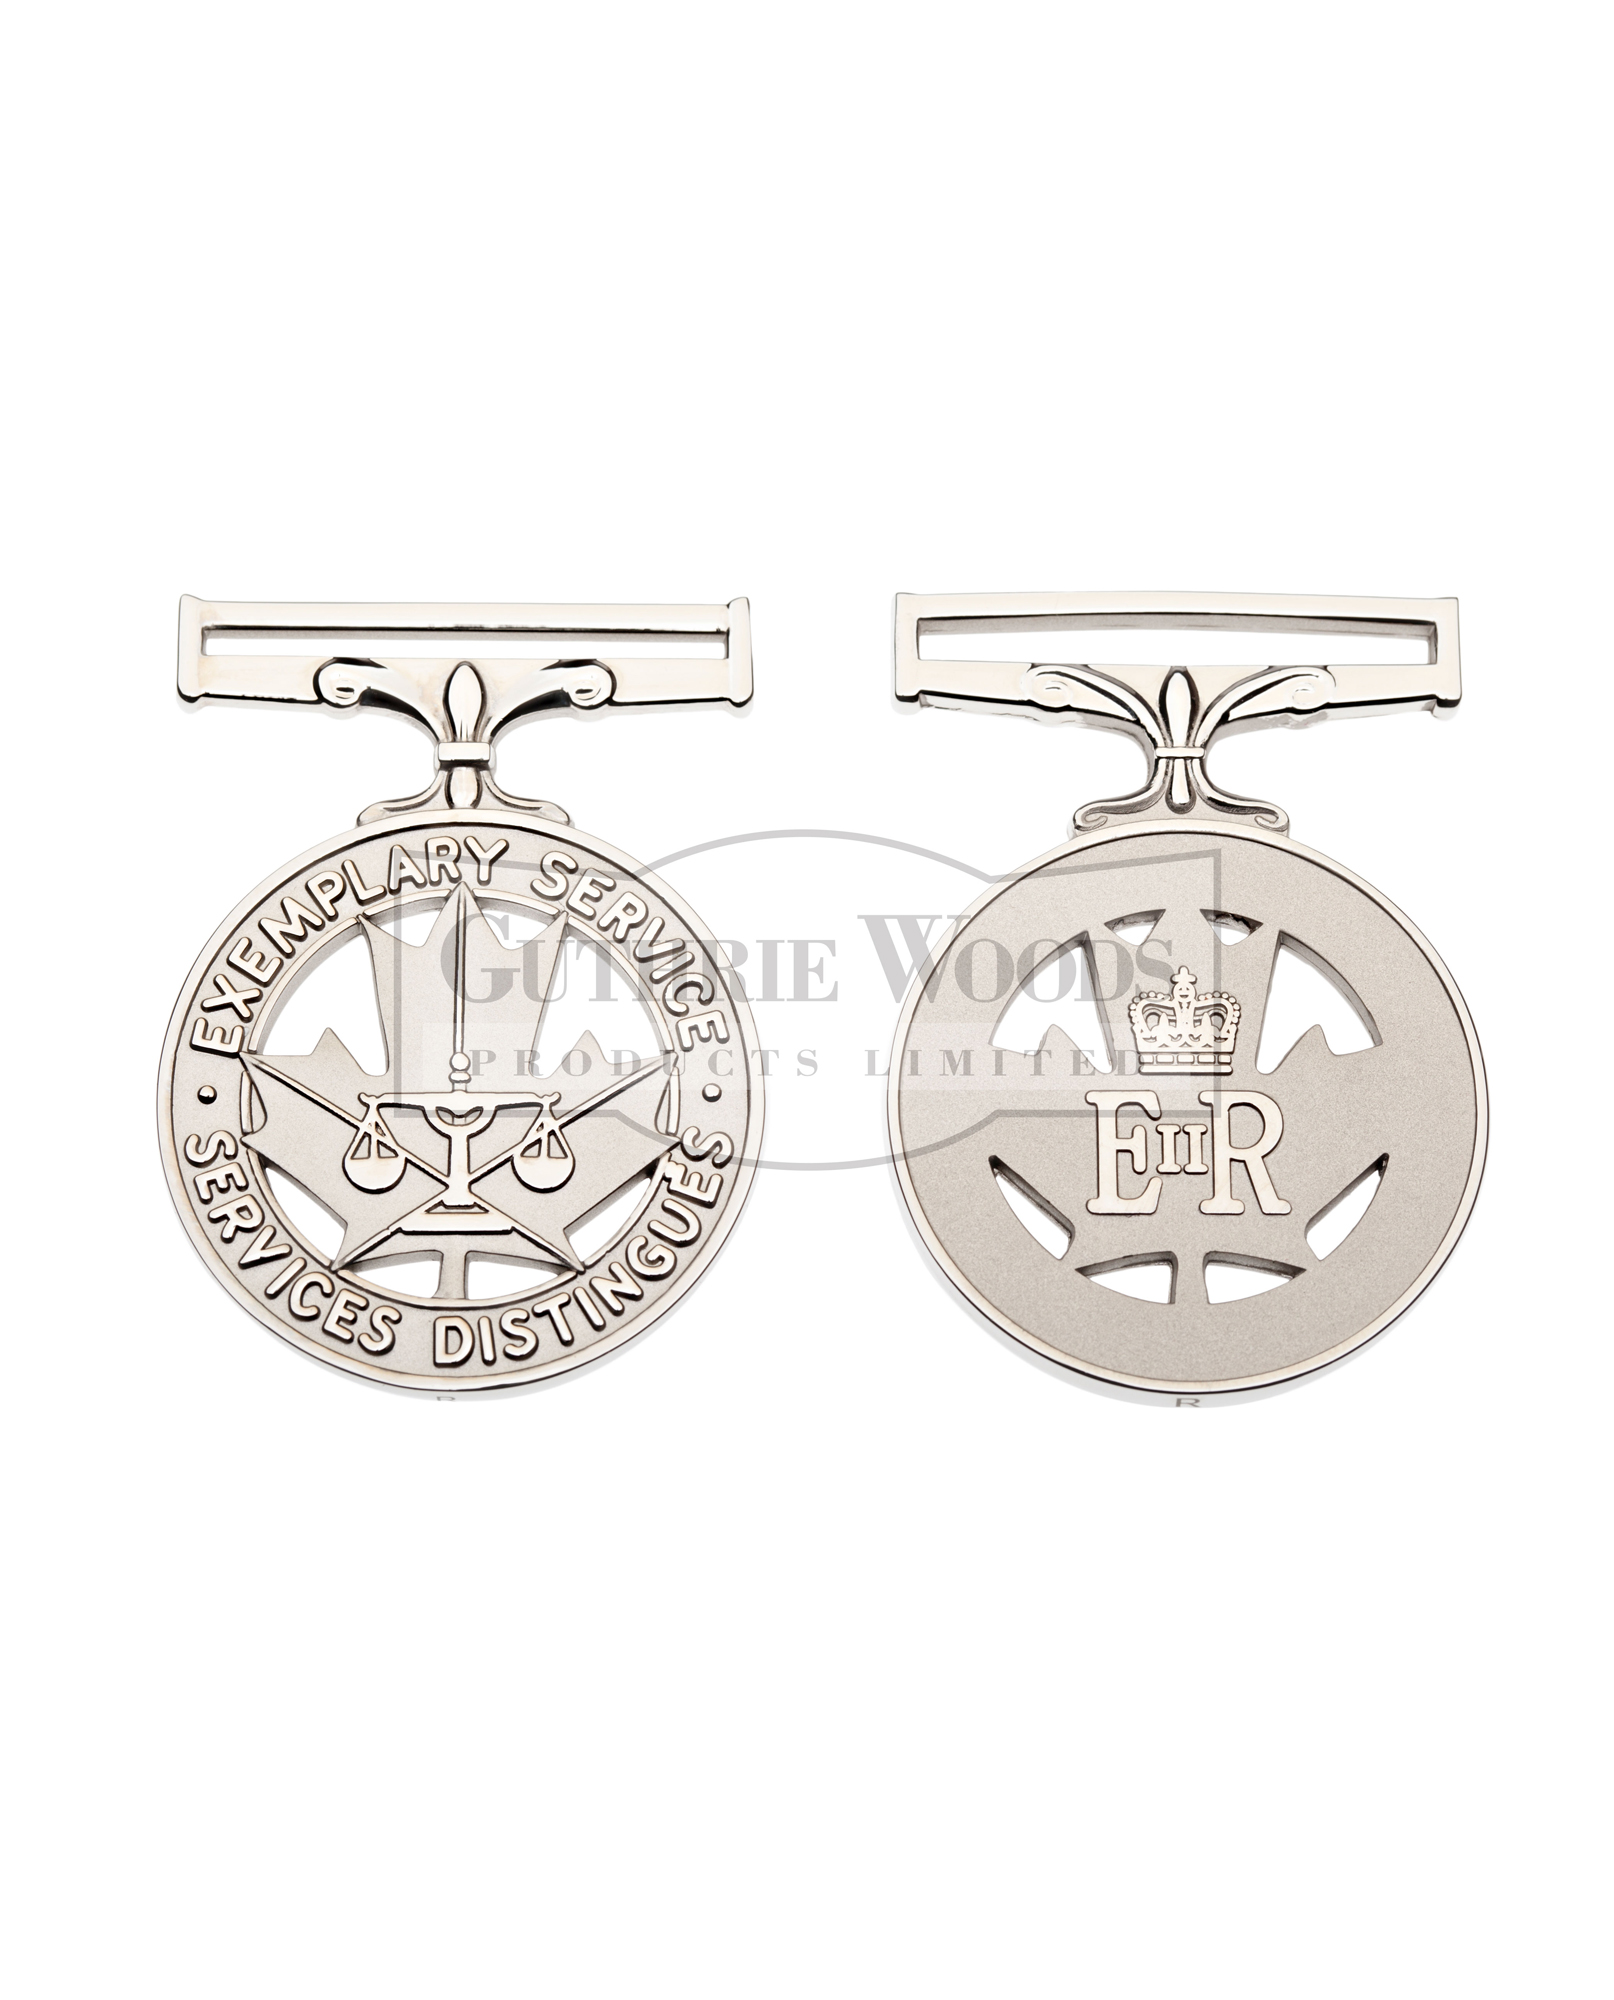 Police Services Exemplary Service - Medal